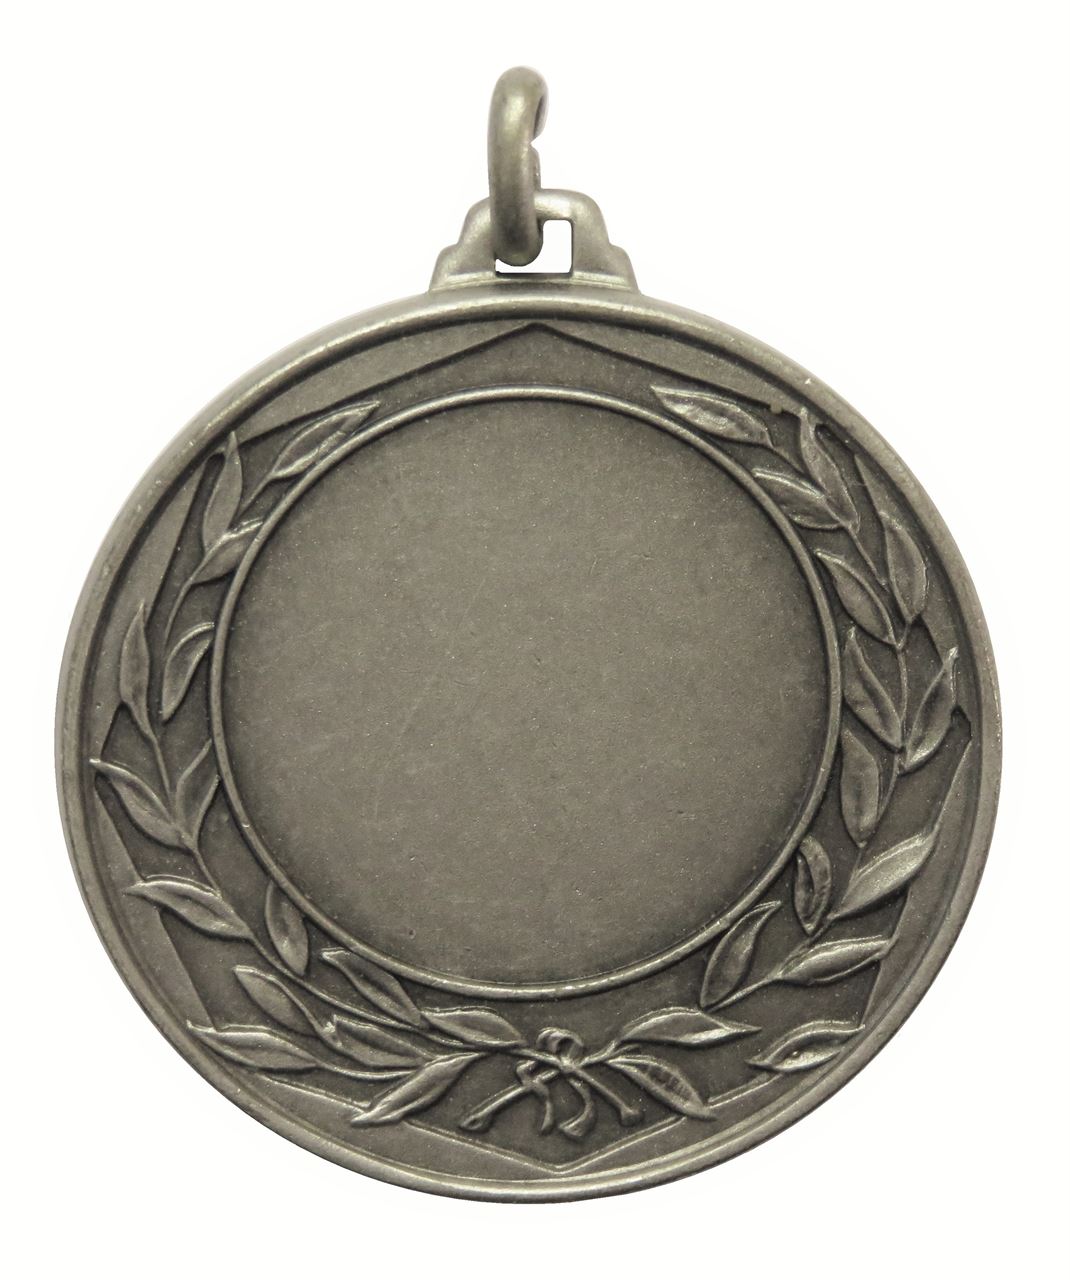 Silver Quality Wreath Medal (size: 42mm) - 5405E